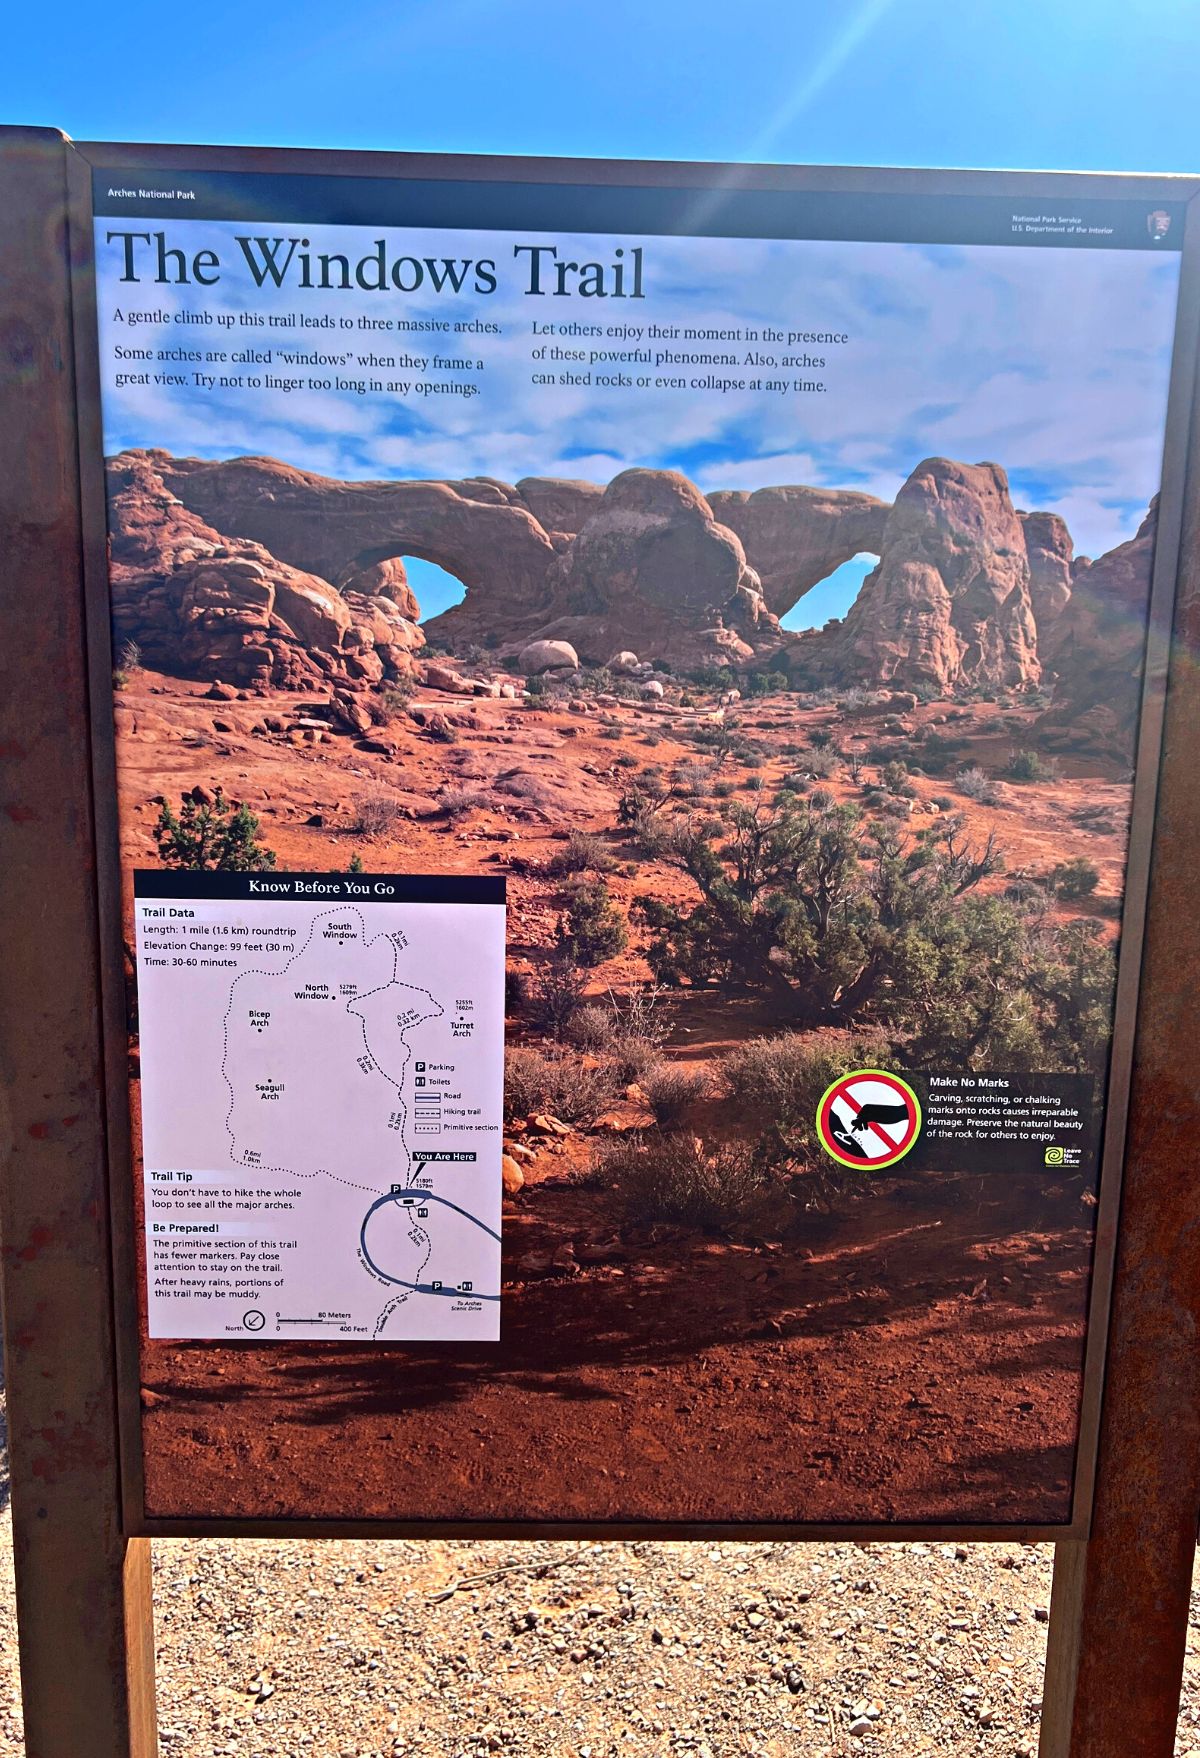 The windows trail at Arches National Park.